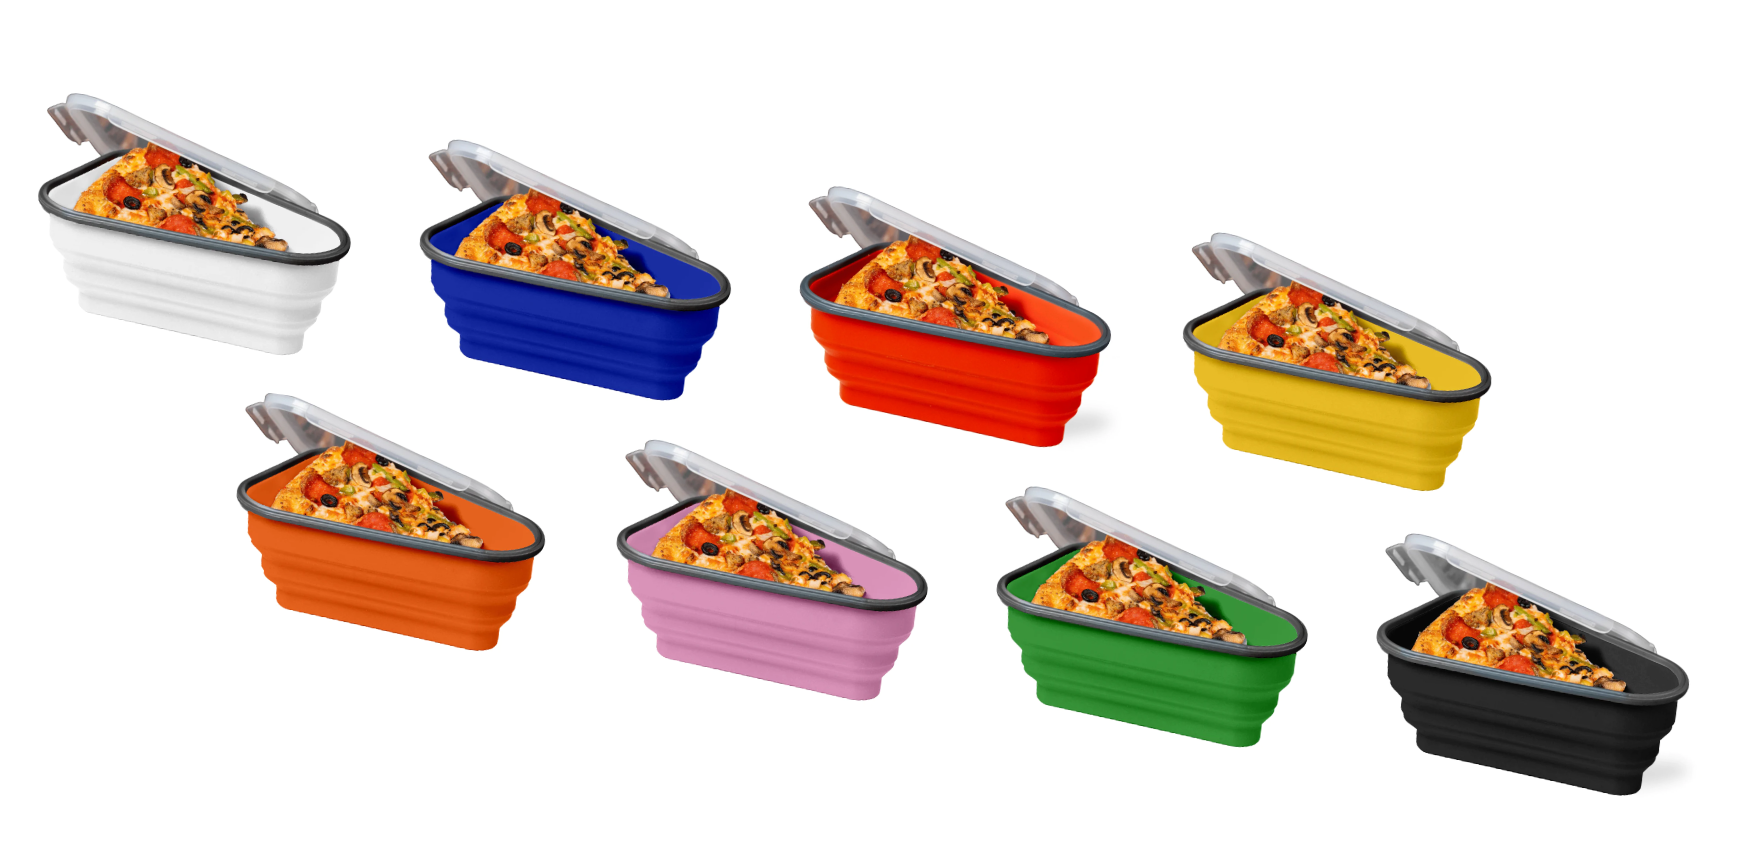 PIZZA PACK® The Reusable Pizza Storage Container with 5 Microwavable  Serving Trays - BPA-Free Adjustable Pizza Slice Container to Organize &  Save